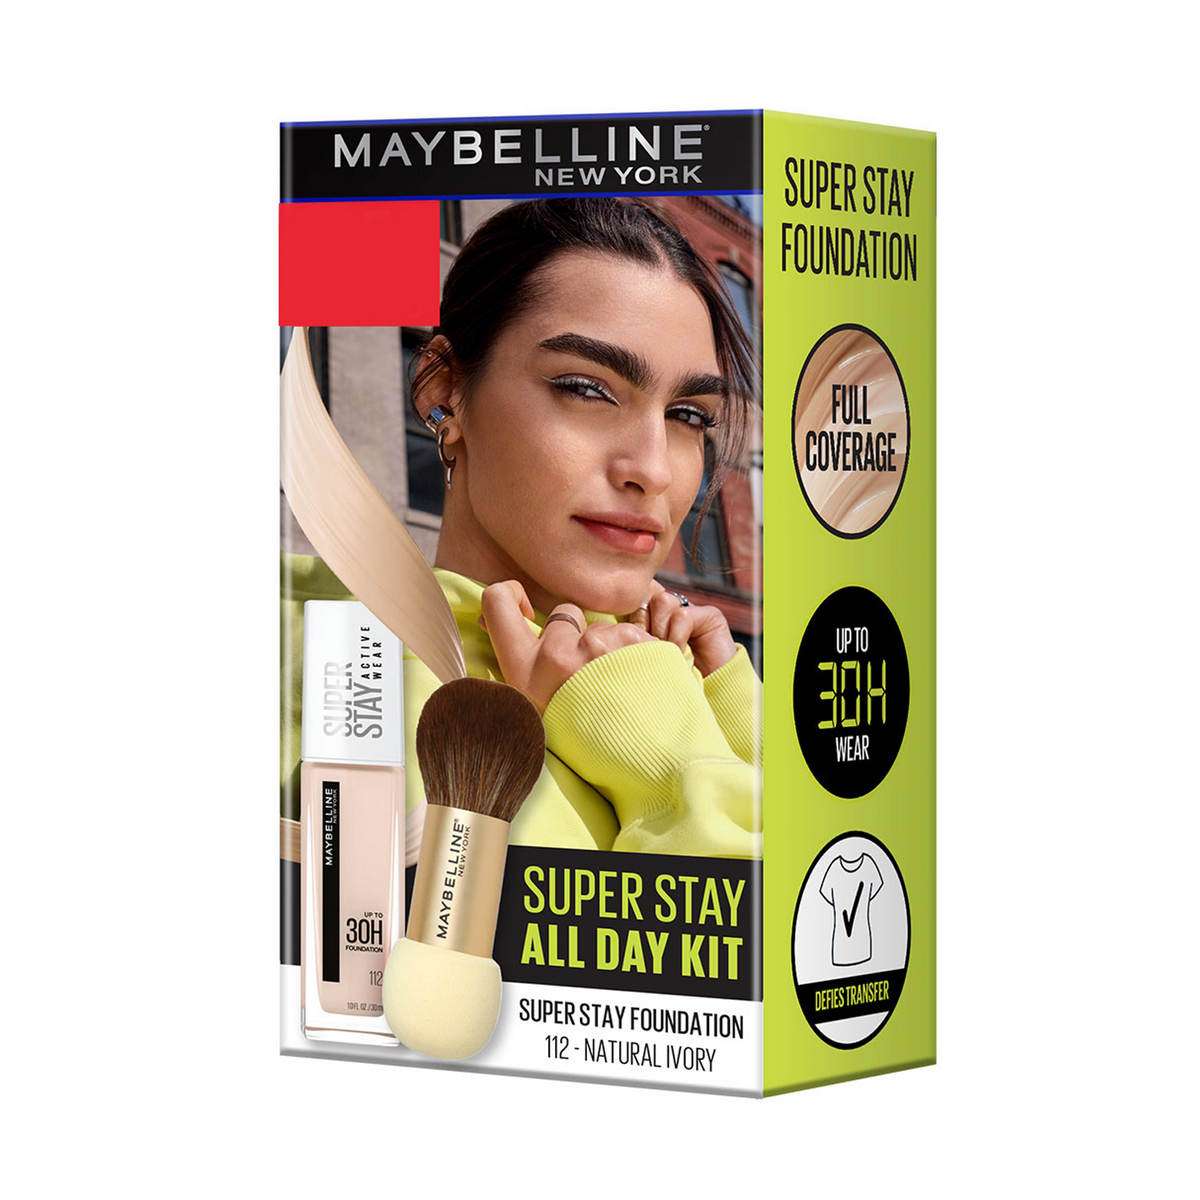 Buy Maybelline SSBeauty Online Foundation York Coverage | in Active New Stay Full Price India Best at Super Liquid Wear